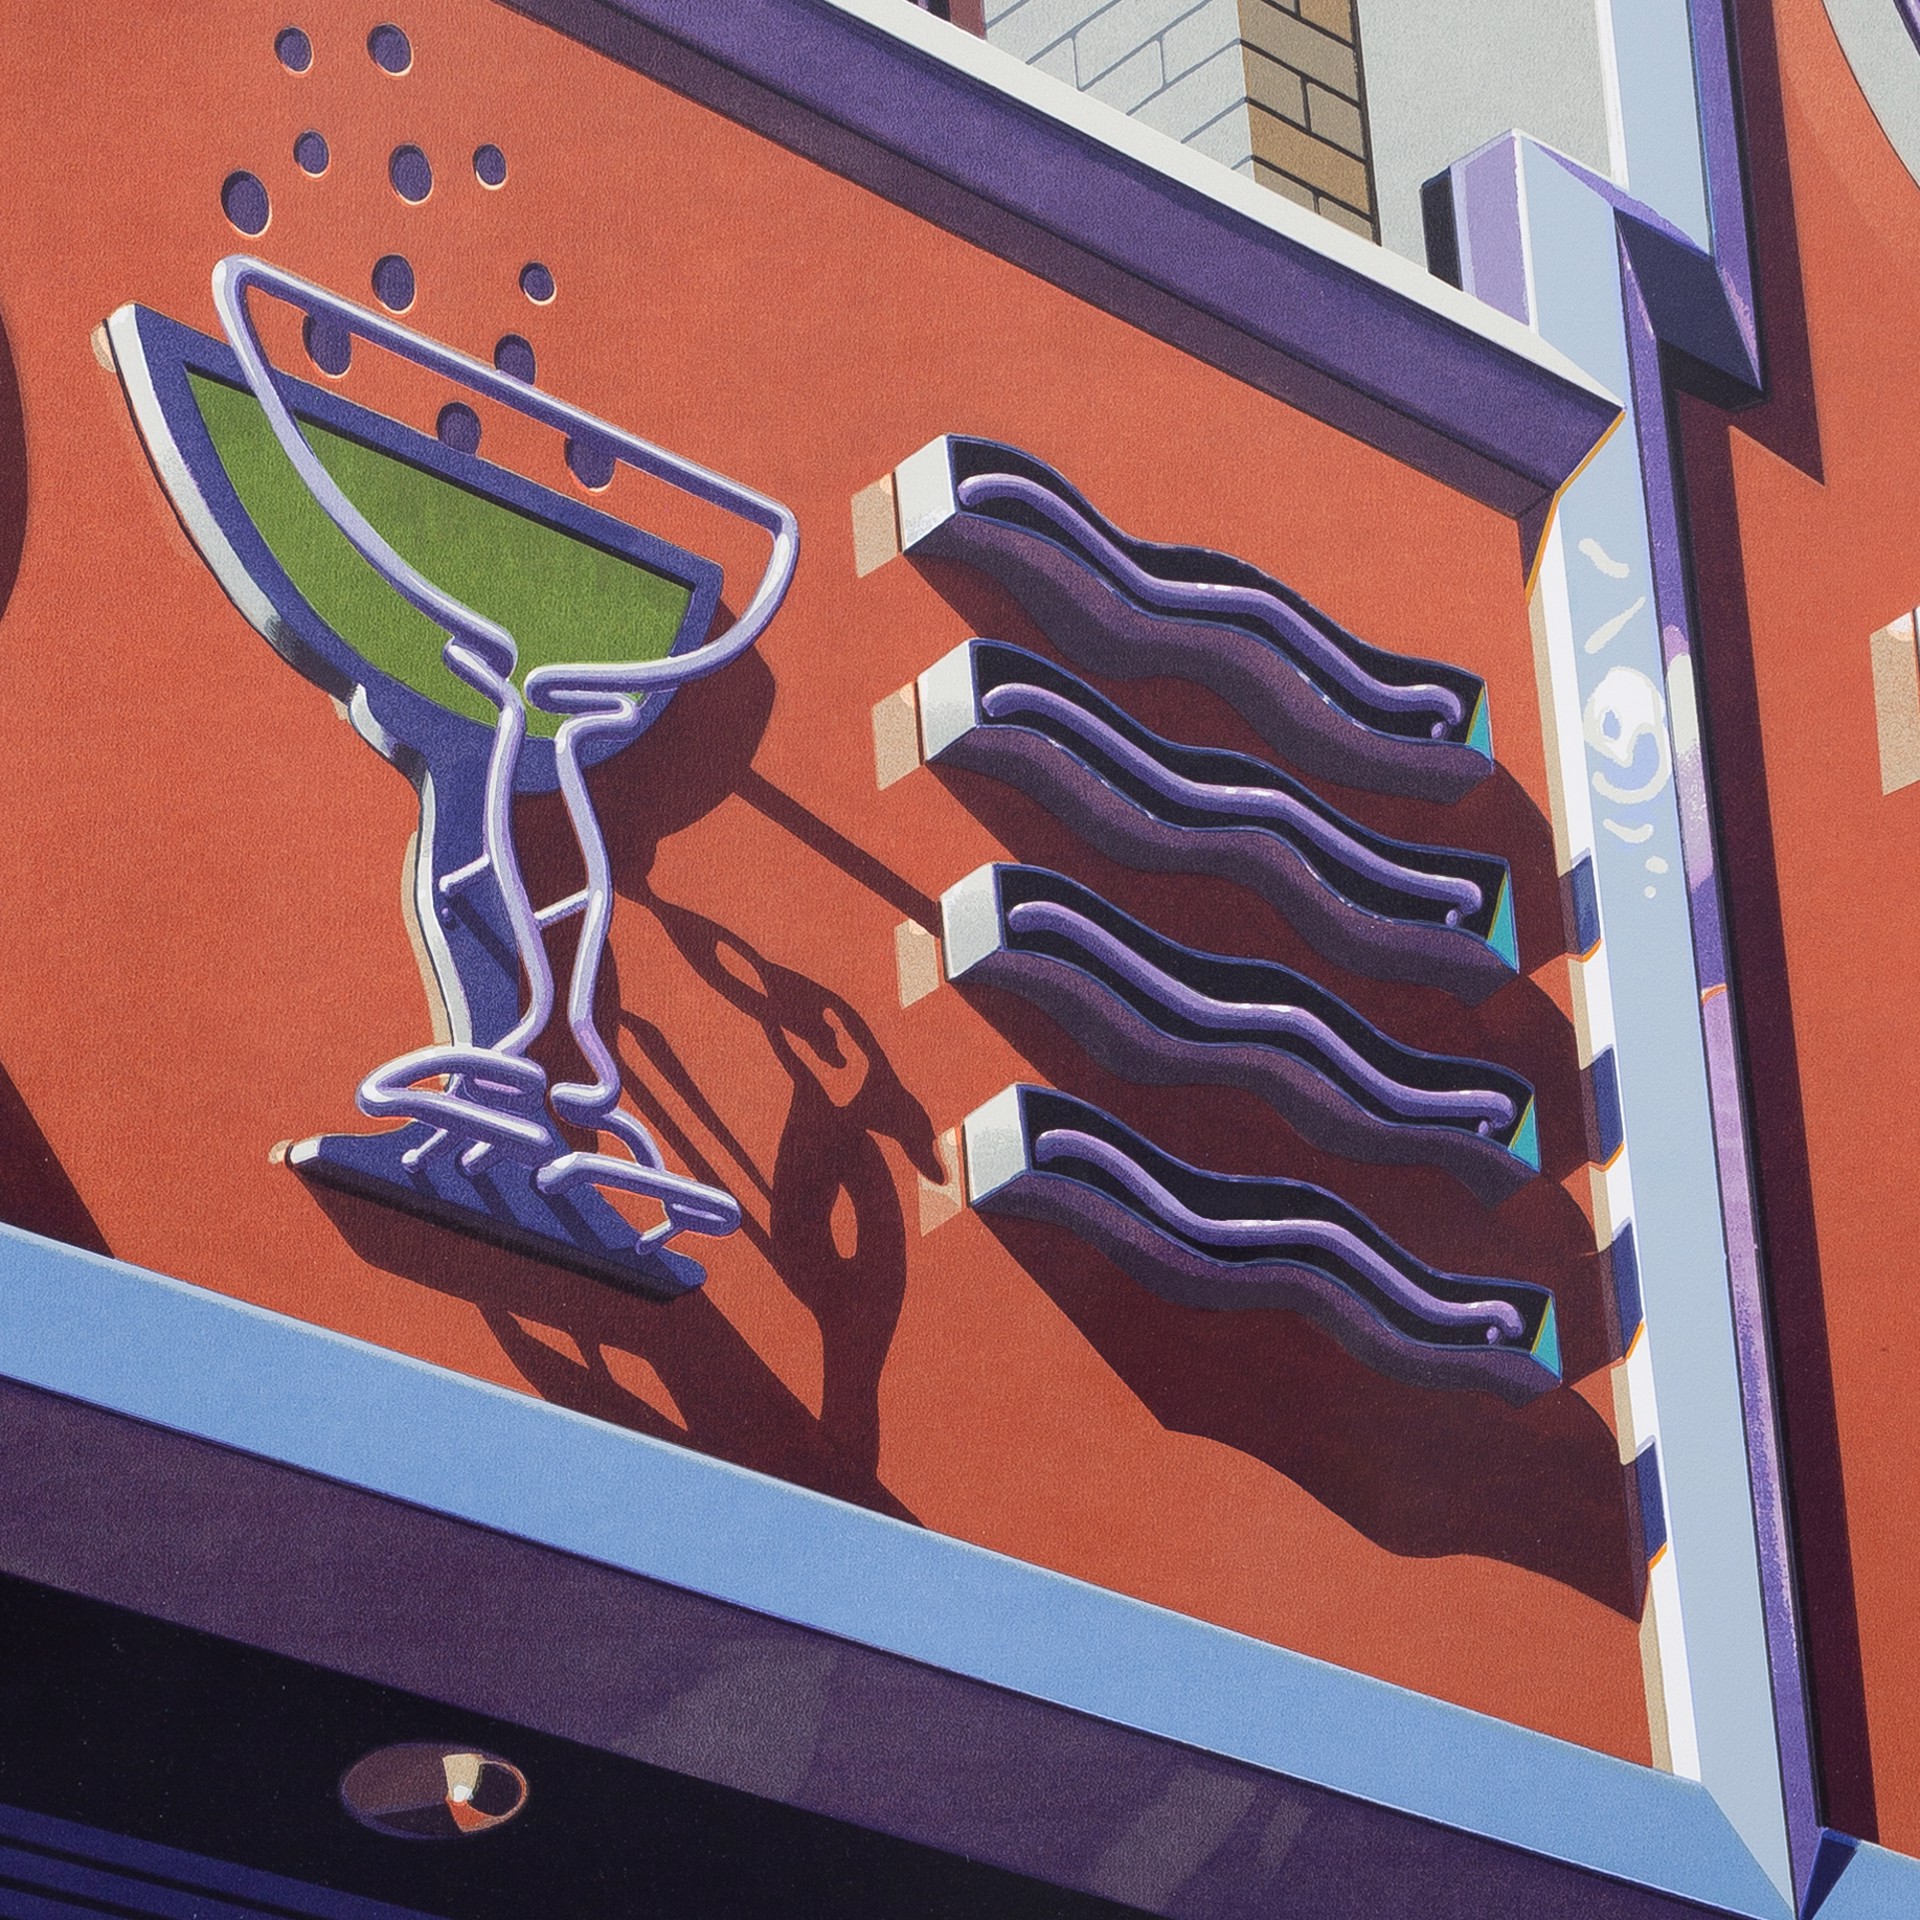 Champagne (from American Signs portfolio) by Robert Cottingham